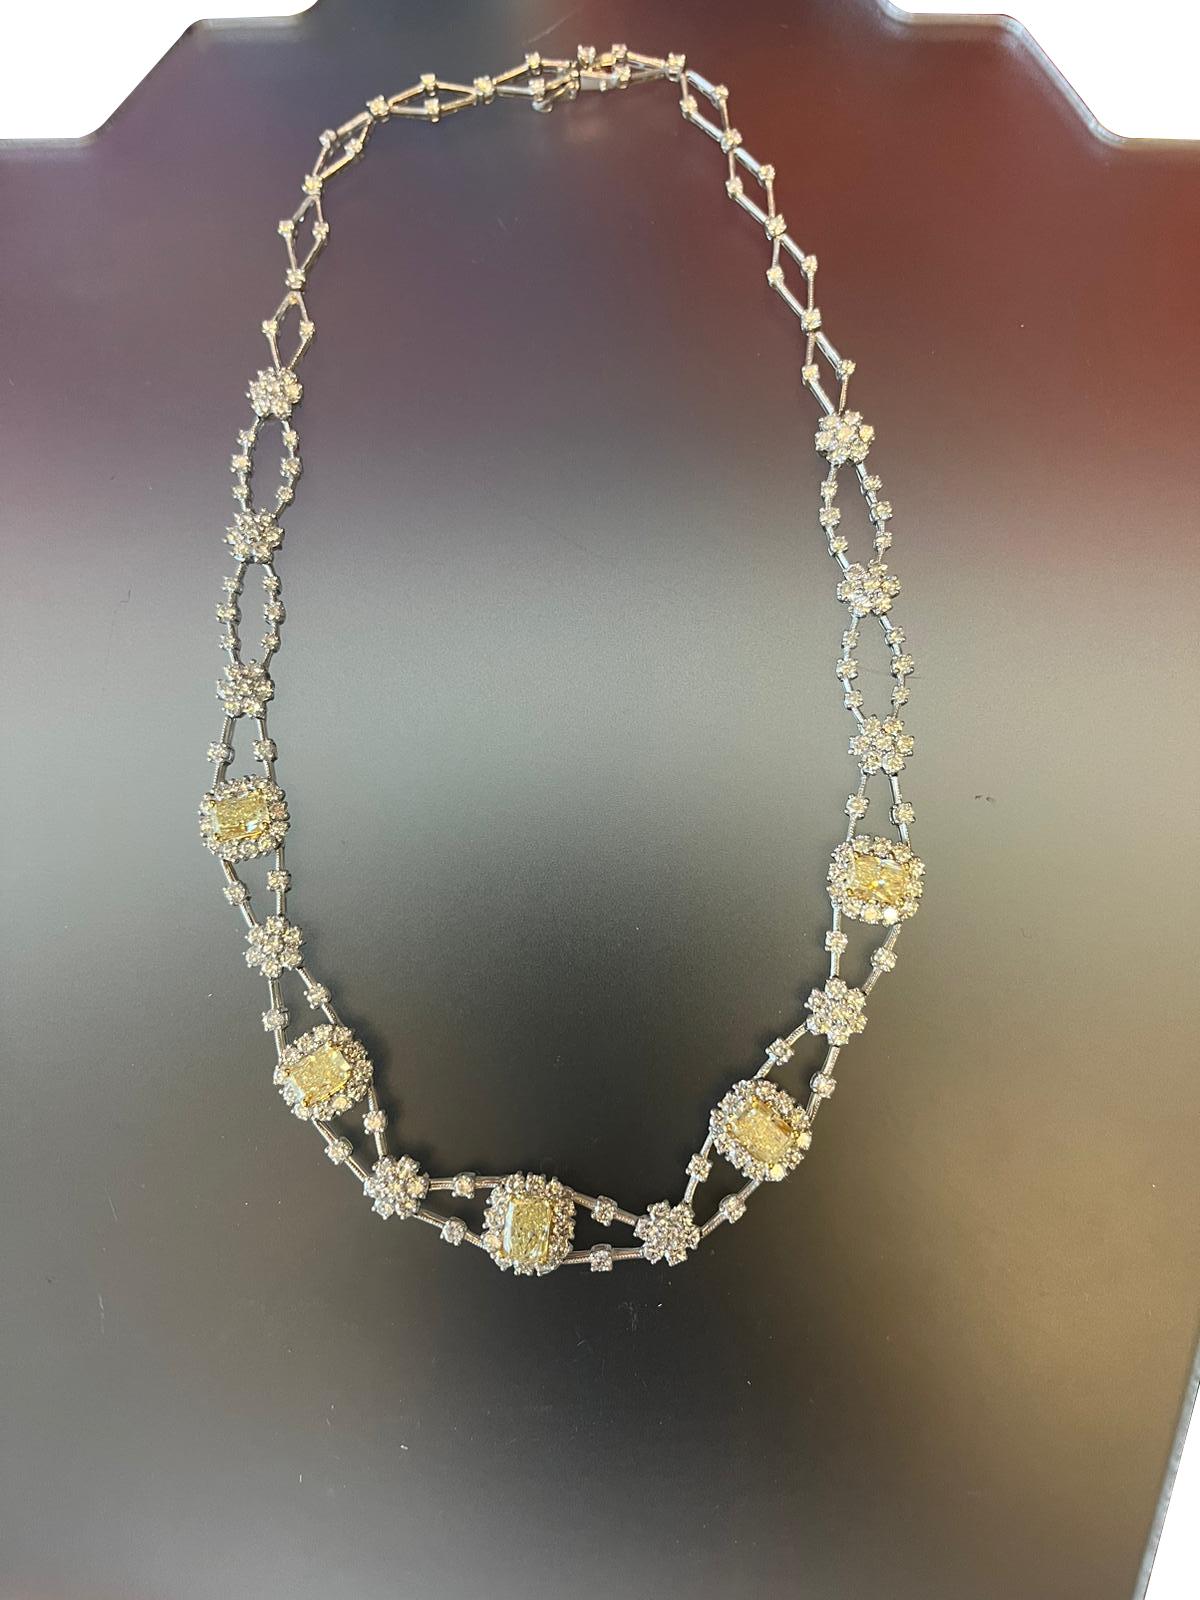 11.8ctw Natural Radiant Cut Yellow Fancy Color 5.80ct White Diamonds Necklace For Sale 4